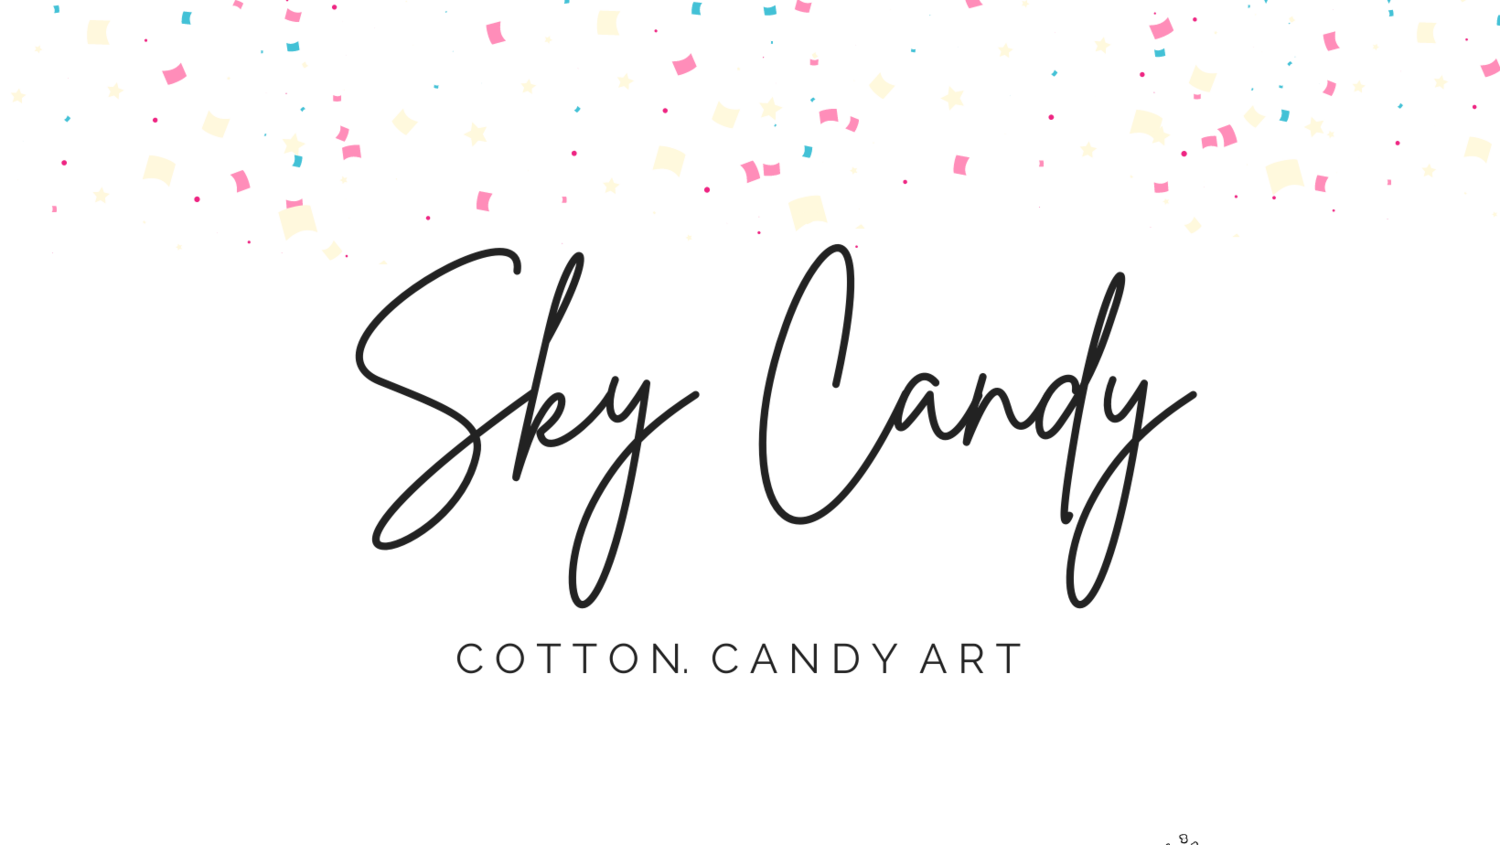 SKY CANDY - Cotton Candy Art